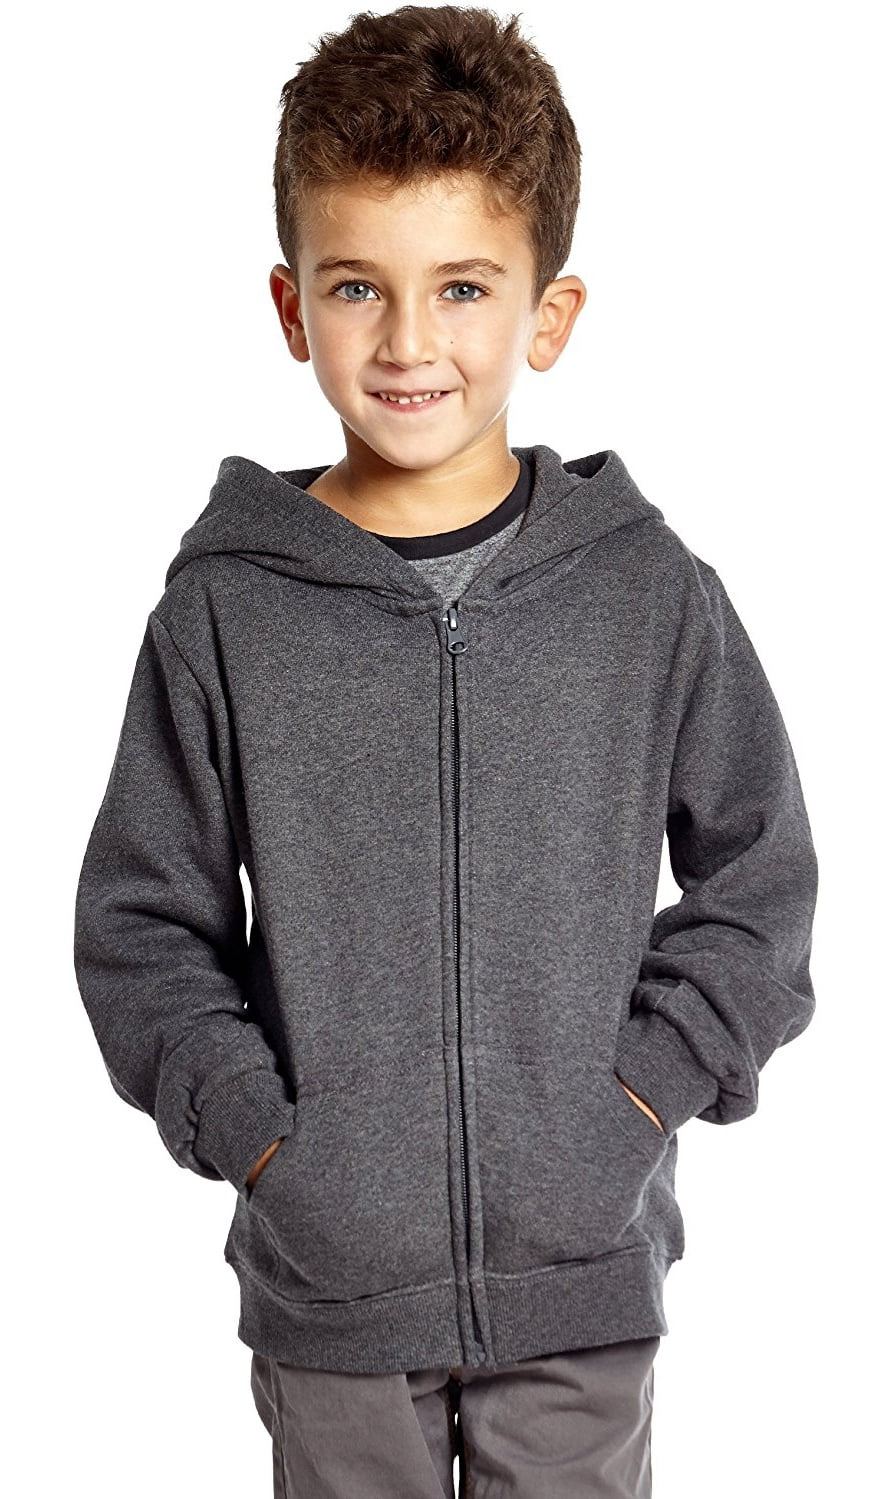 Percussion Unisex Toddler Hoodies Fleece Pull Over Sweatshirt for Boys Girls Kids Youth